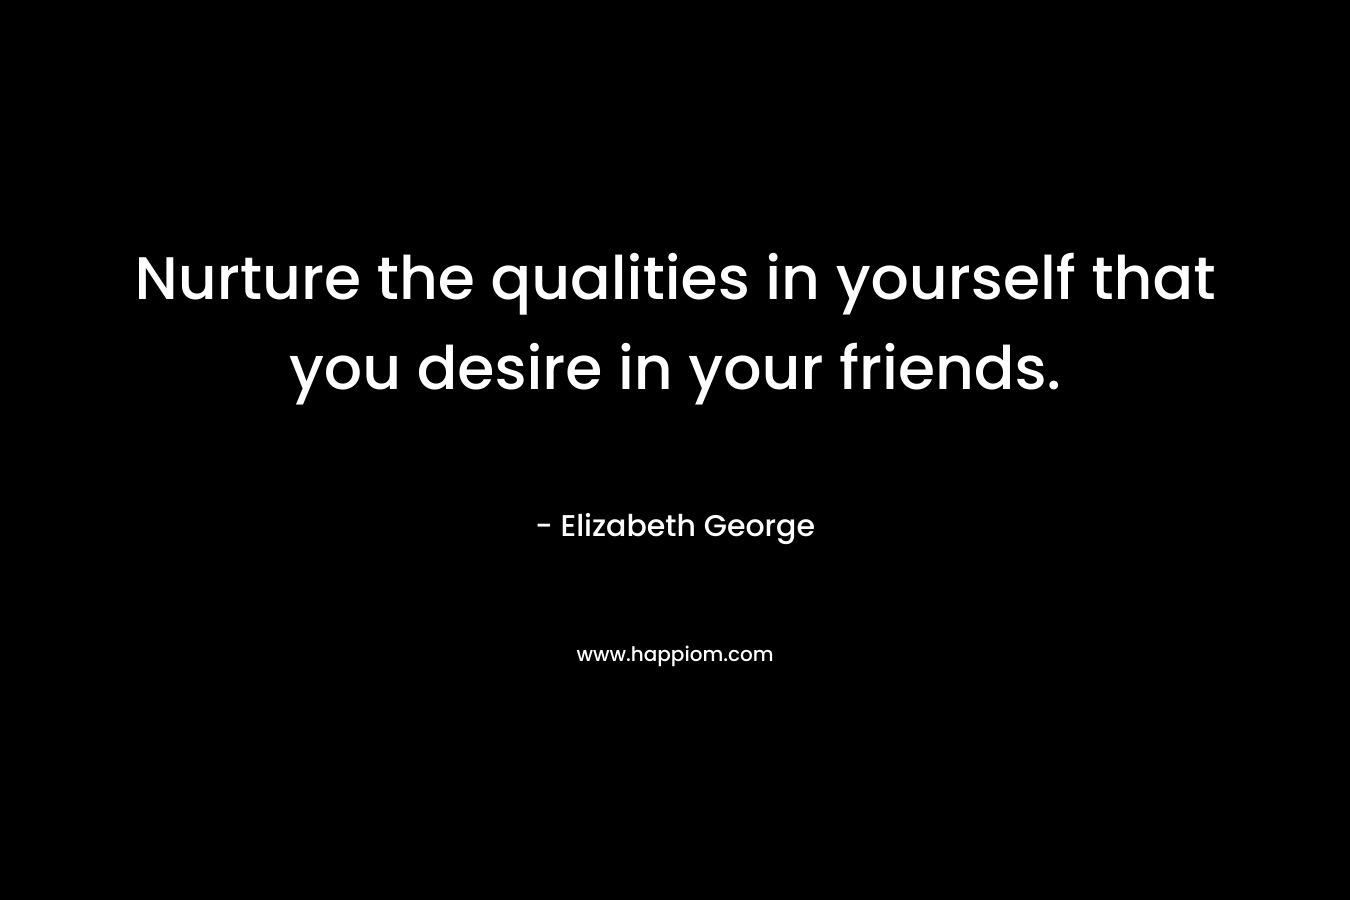 Nurture the qualities in yourself that you desire in your friends.